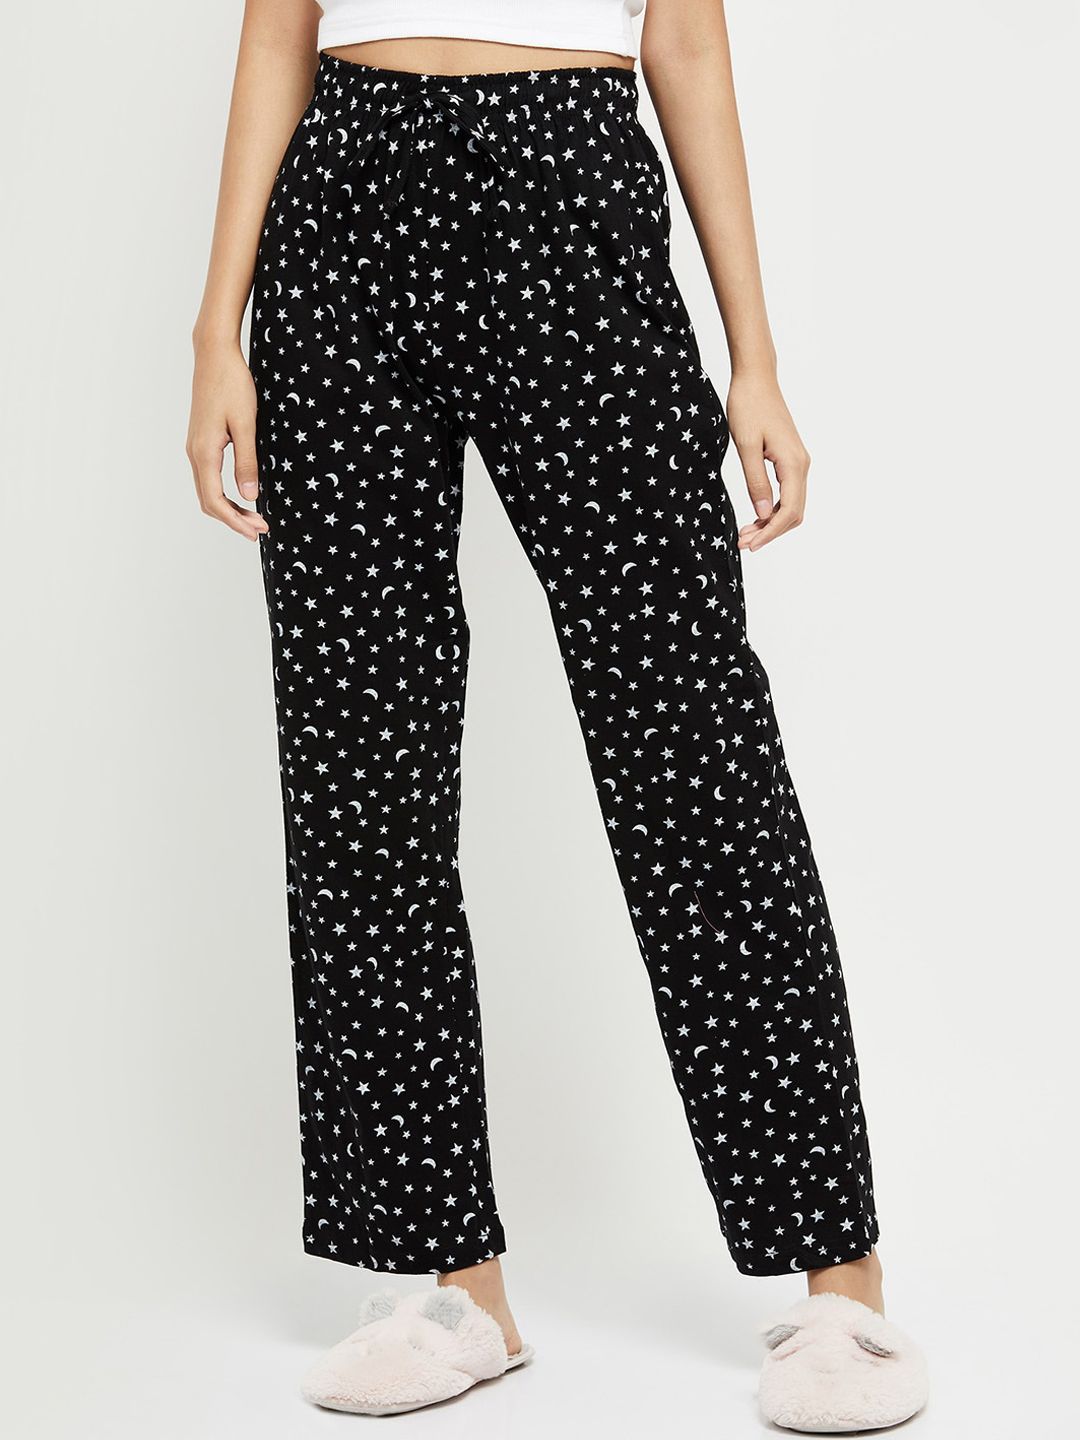 max Women Black Printed Pure Cotton Lounge Pant Price in India